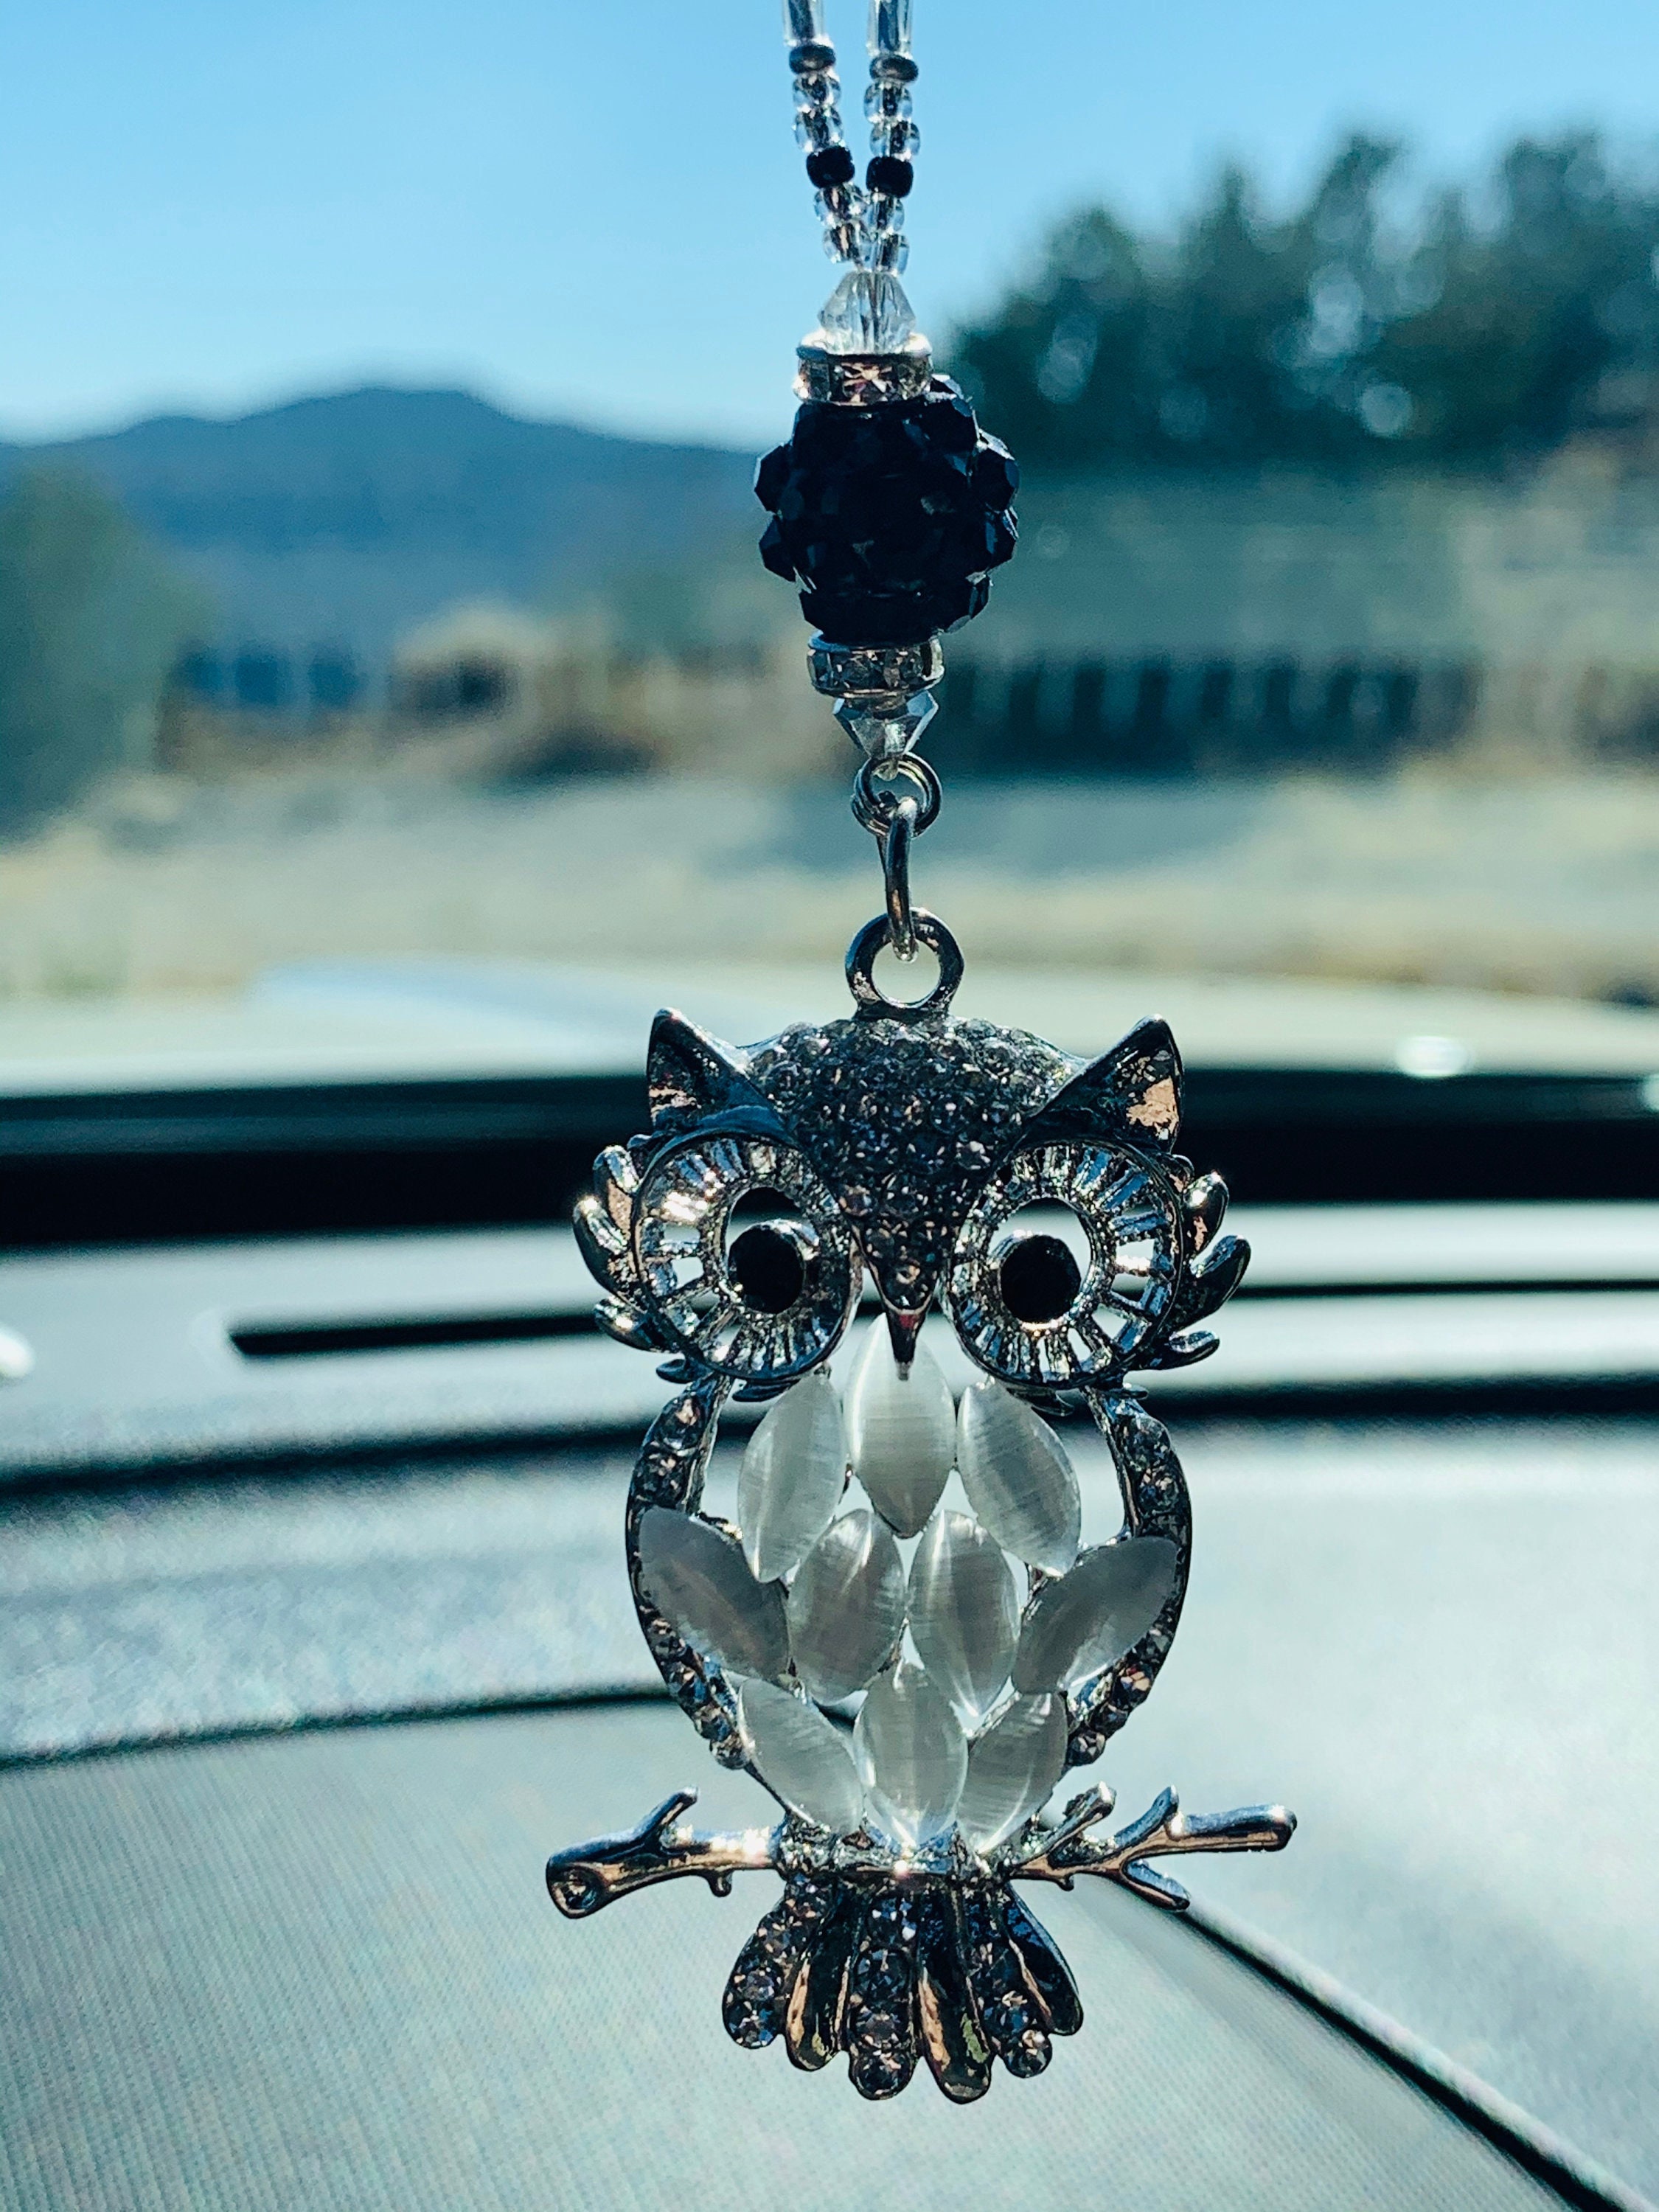 Handmade Car Rear View Mirror Charms Hanging Accessories Decorations  Crystal Rearview Mirror Car Charm Ornament Pendant Decor